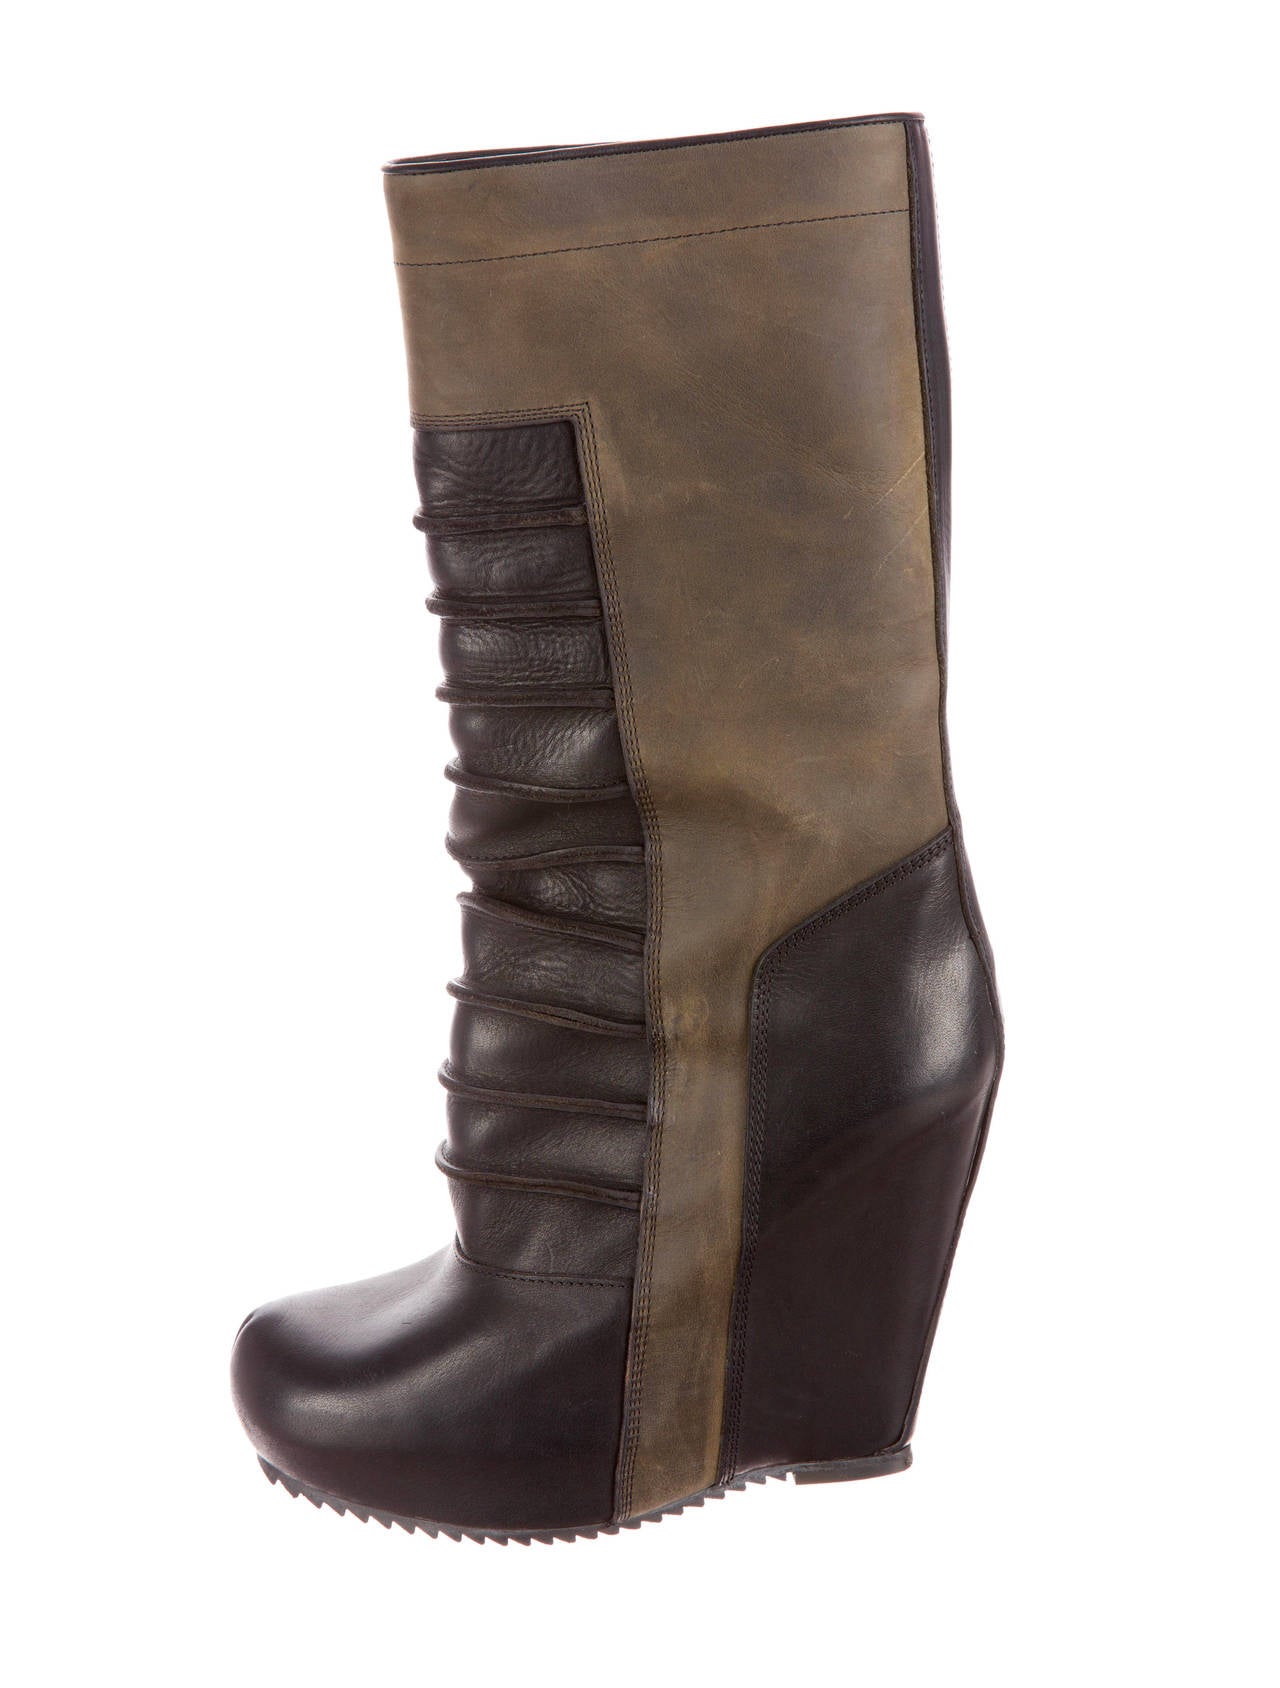 Rick Owens short Ruhlmann wedge short boots with olive suede and black creased leather. Calf Circumference 12”, Shaft 11.5”, Heels 4.75”